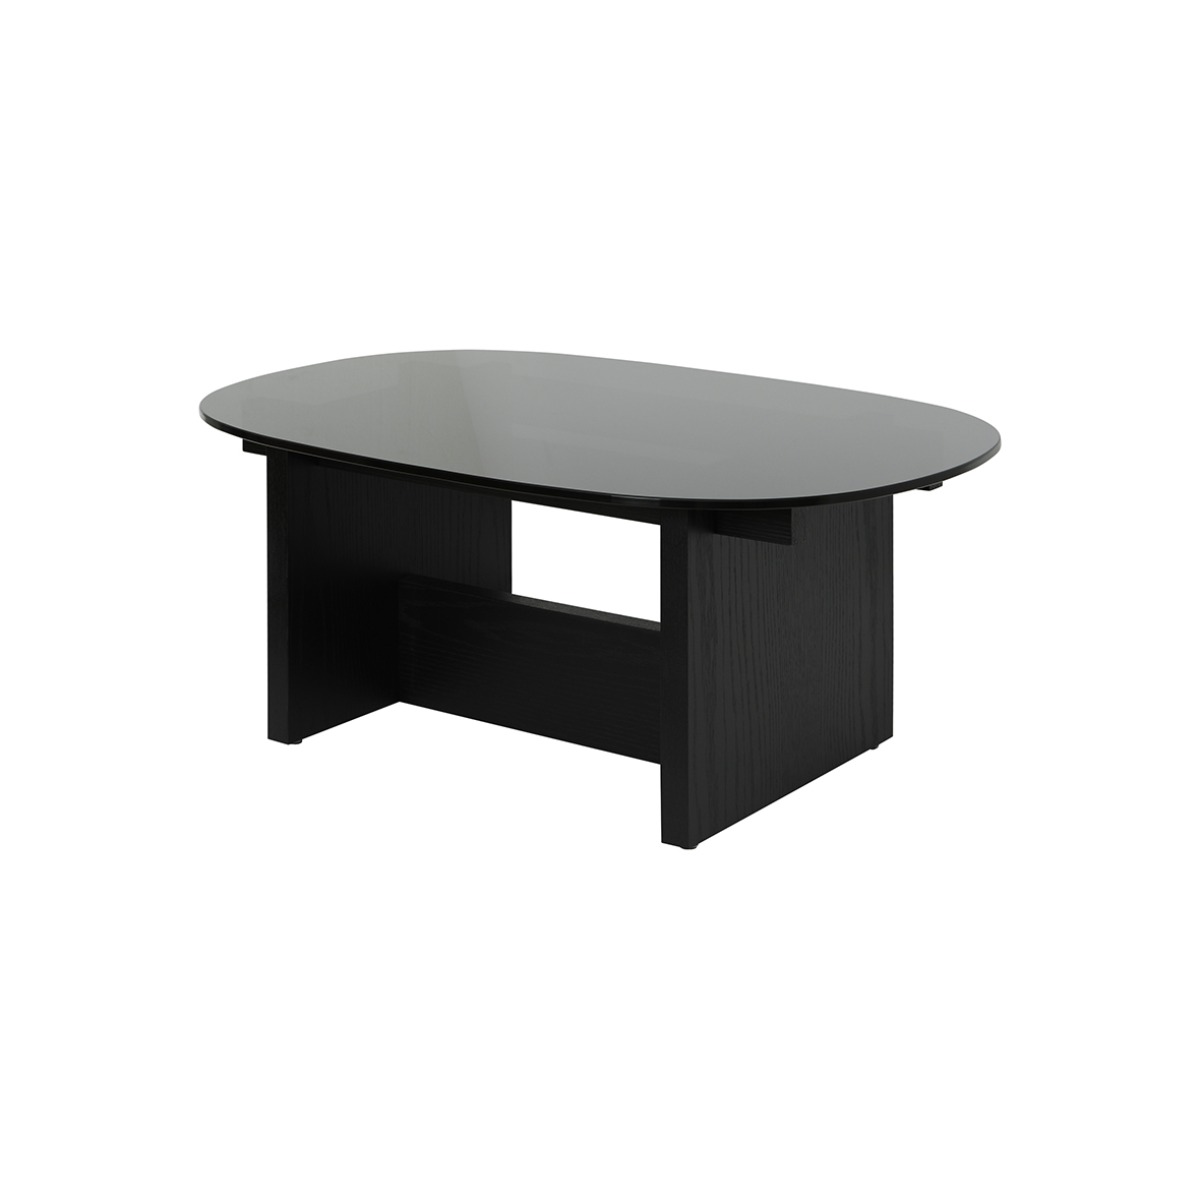 CONNECTORIAL Round Sofa Table - Black